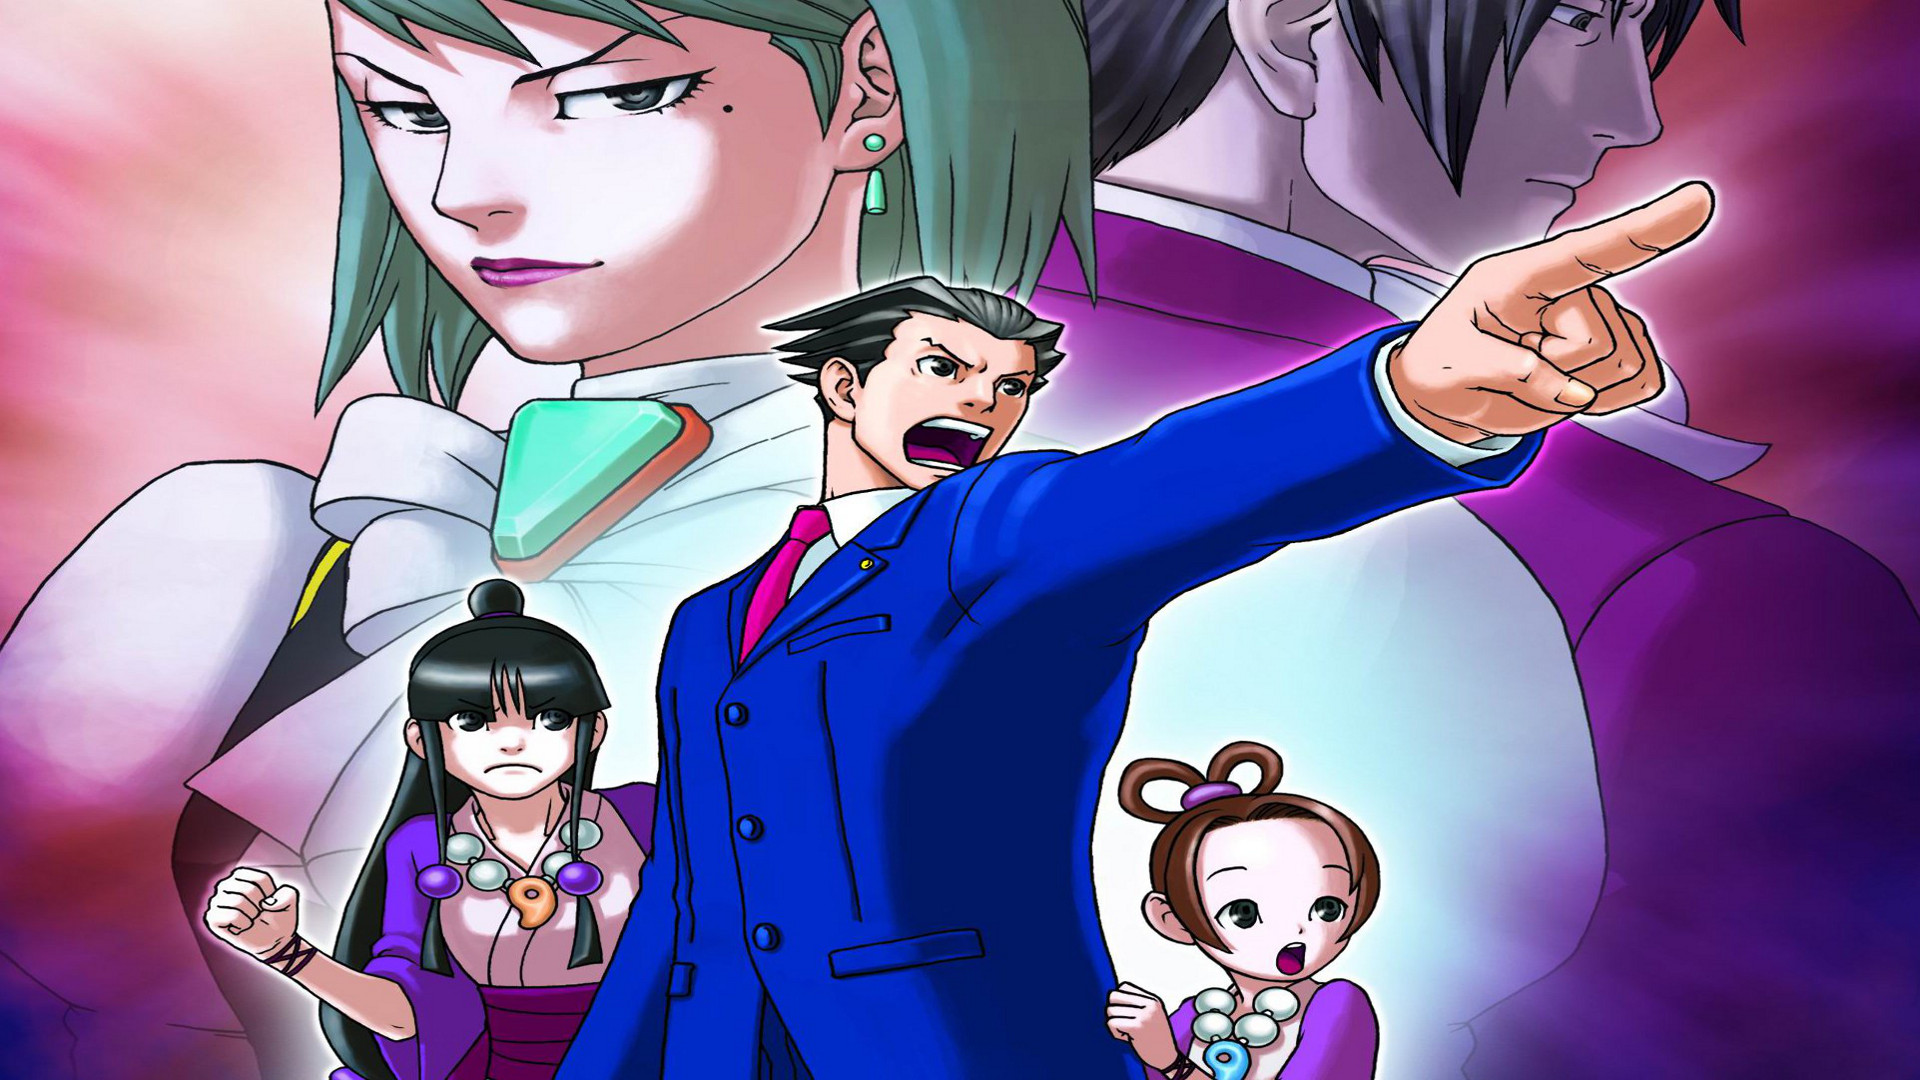 Video Game Phoenix Wright Ace Attorney 1920x1080